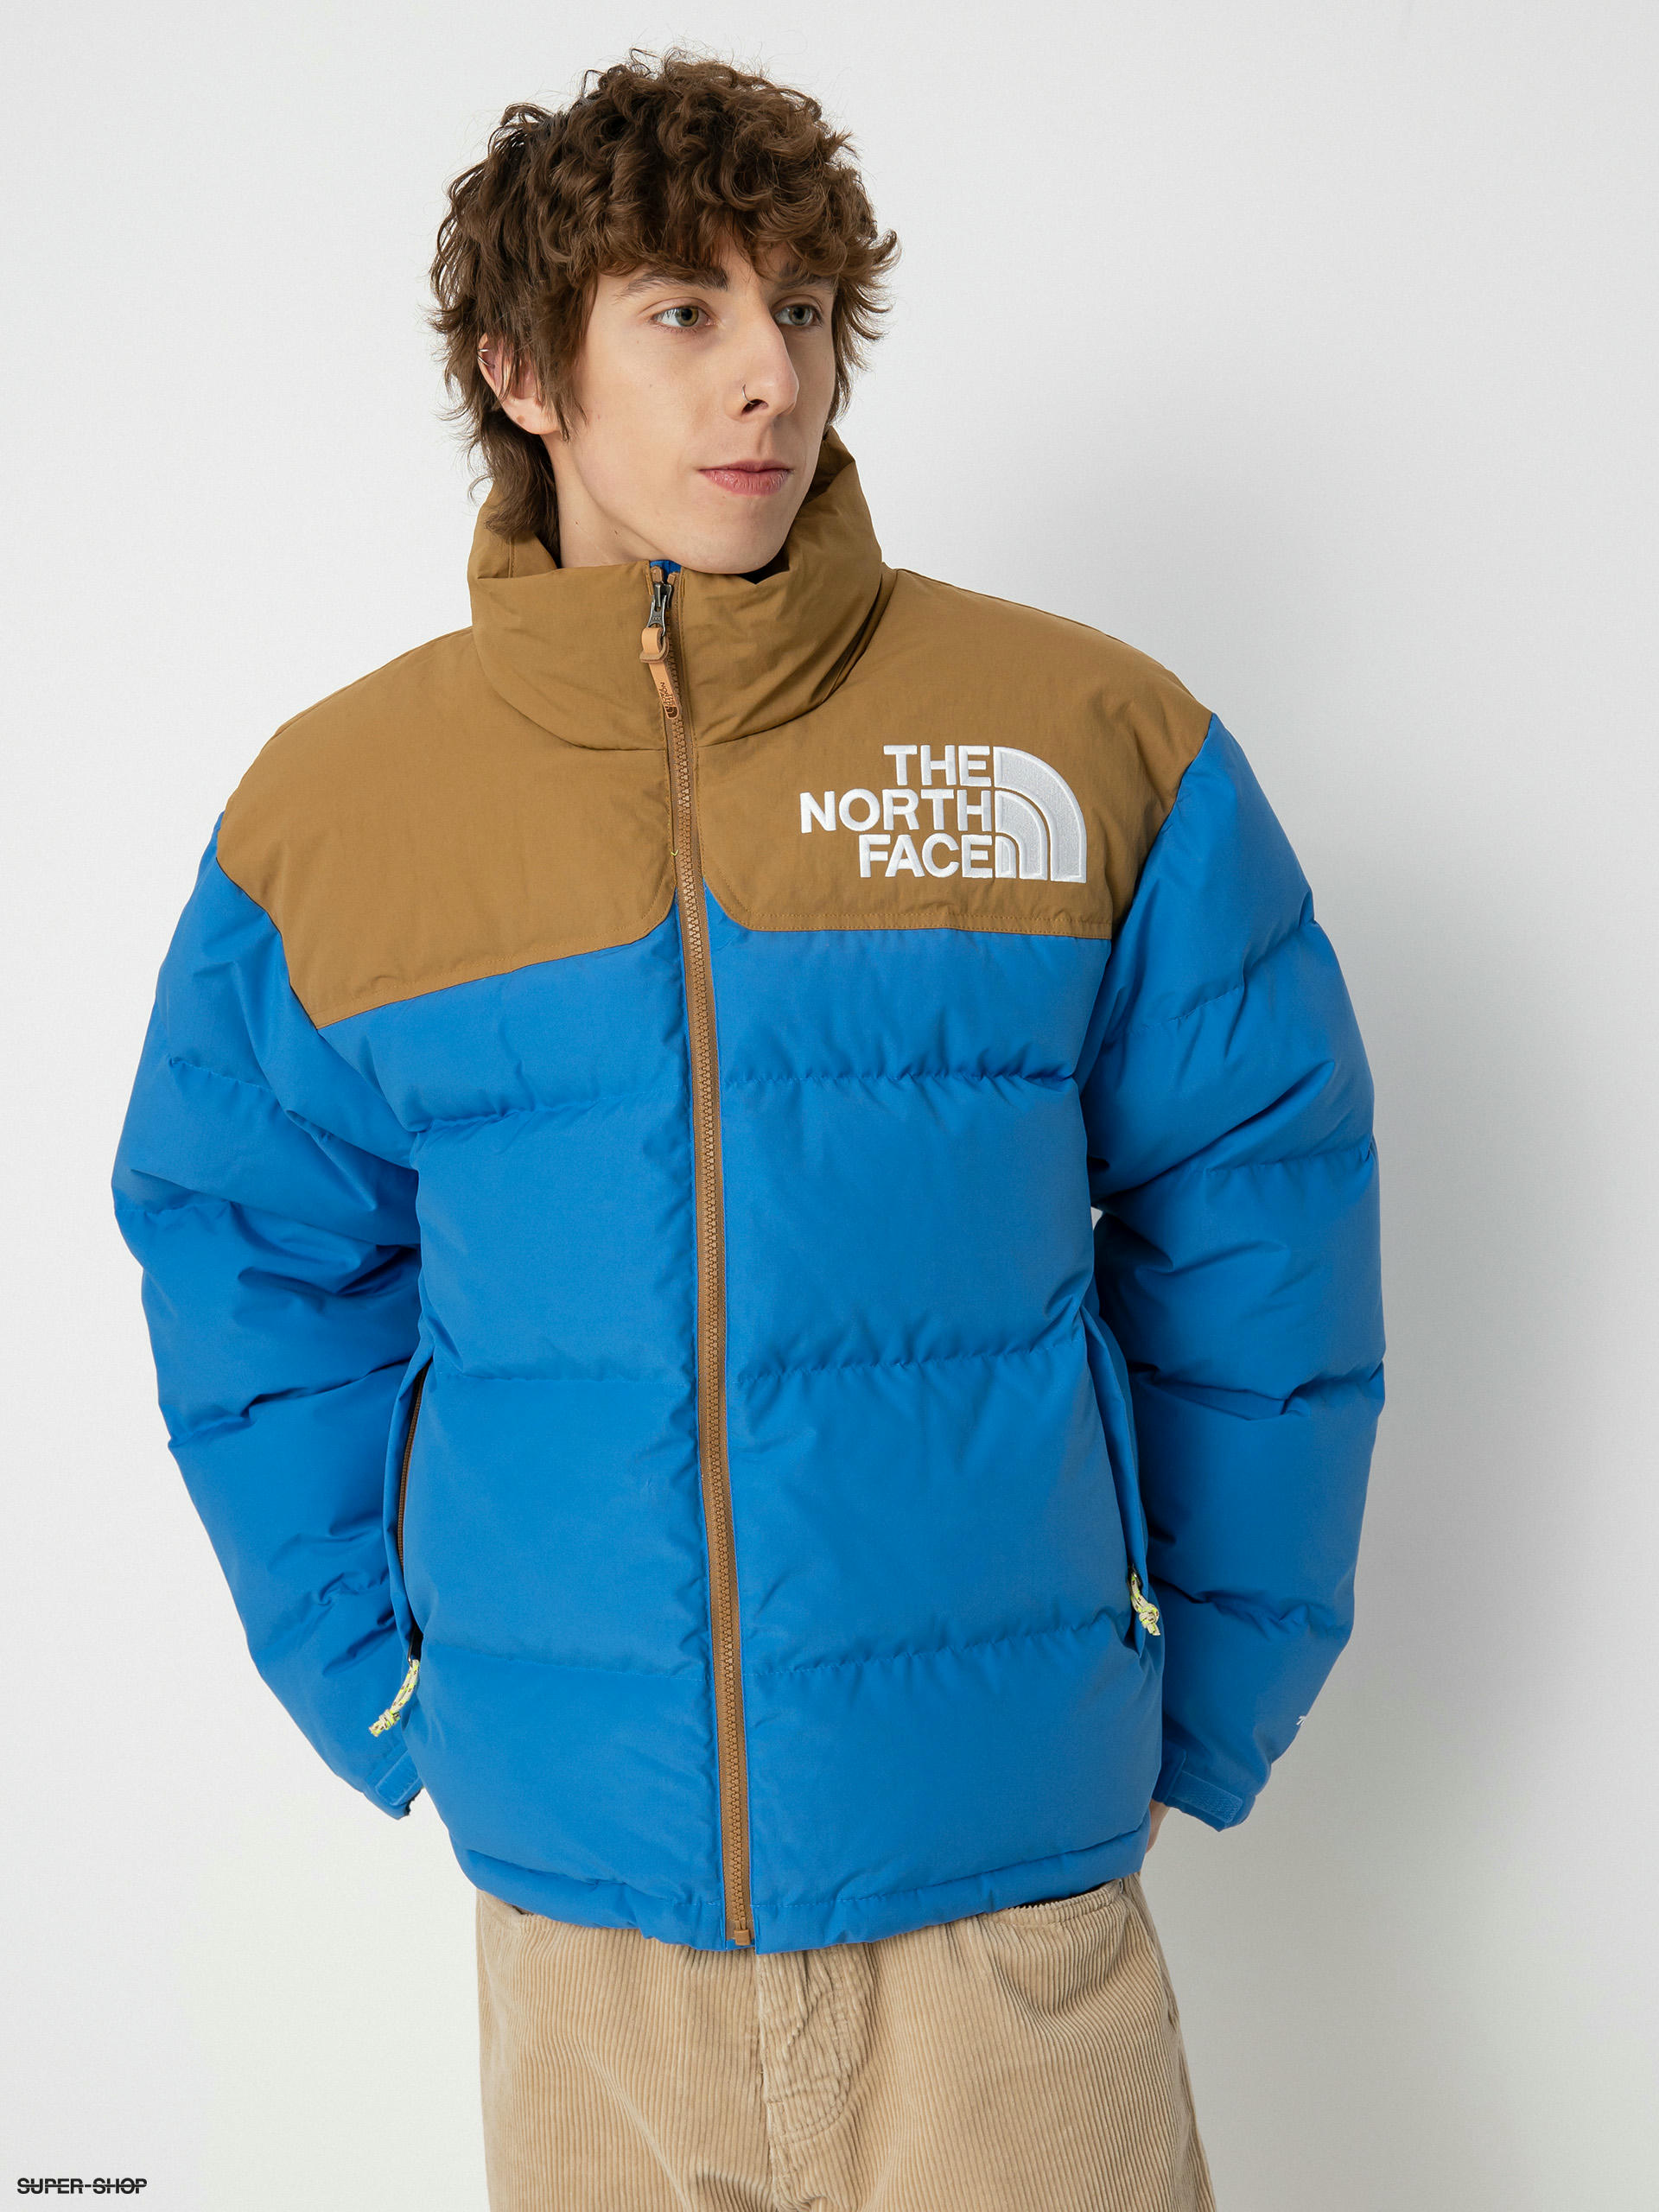 THE NORTH FACE - Sports Store